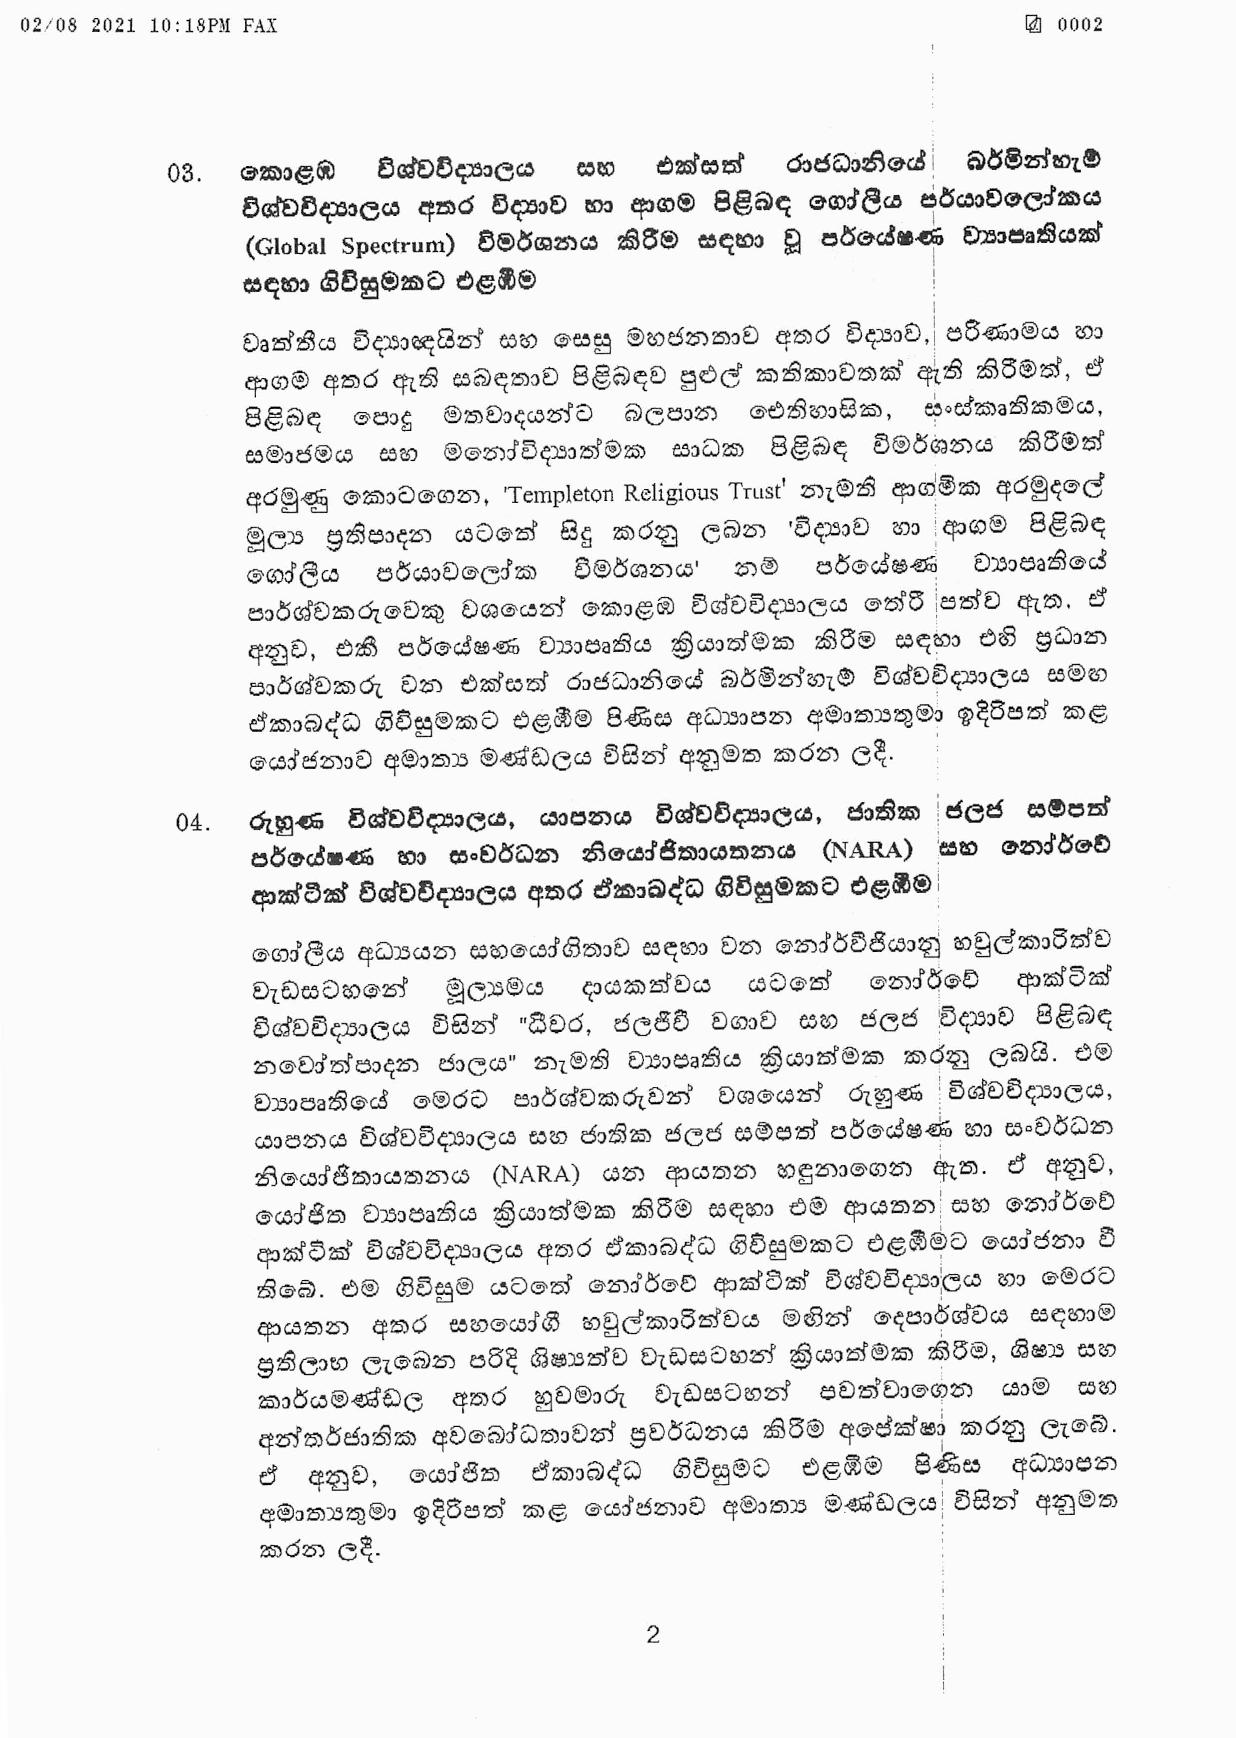 Cabinet Decisions on 02.08.2021 page 001